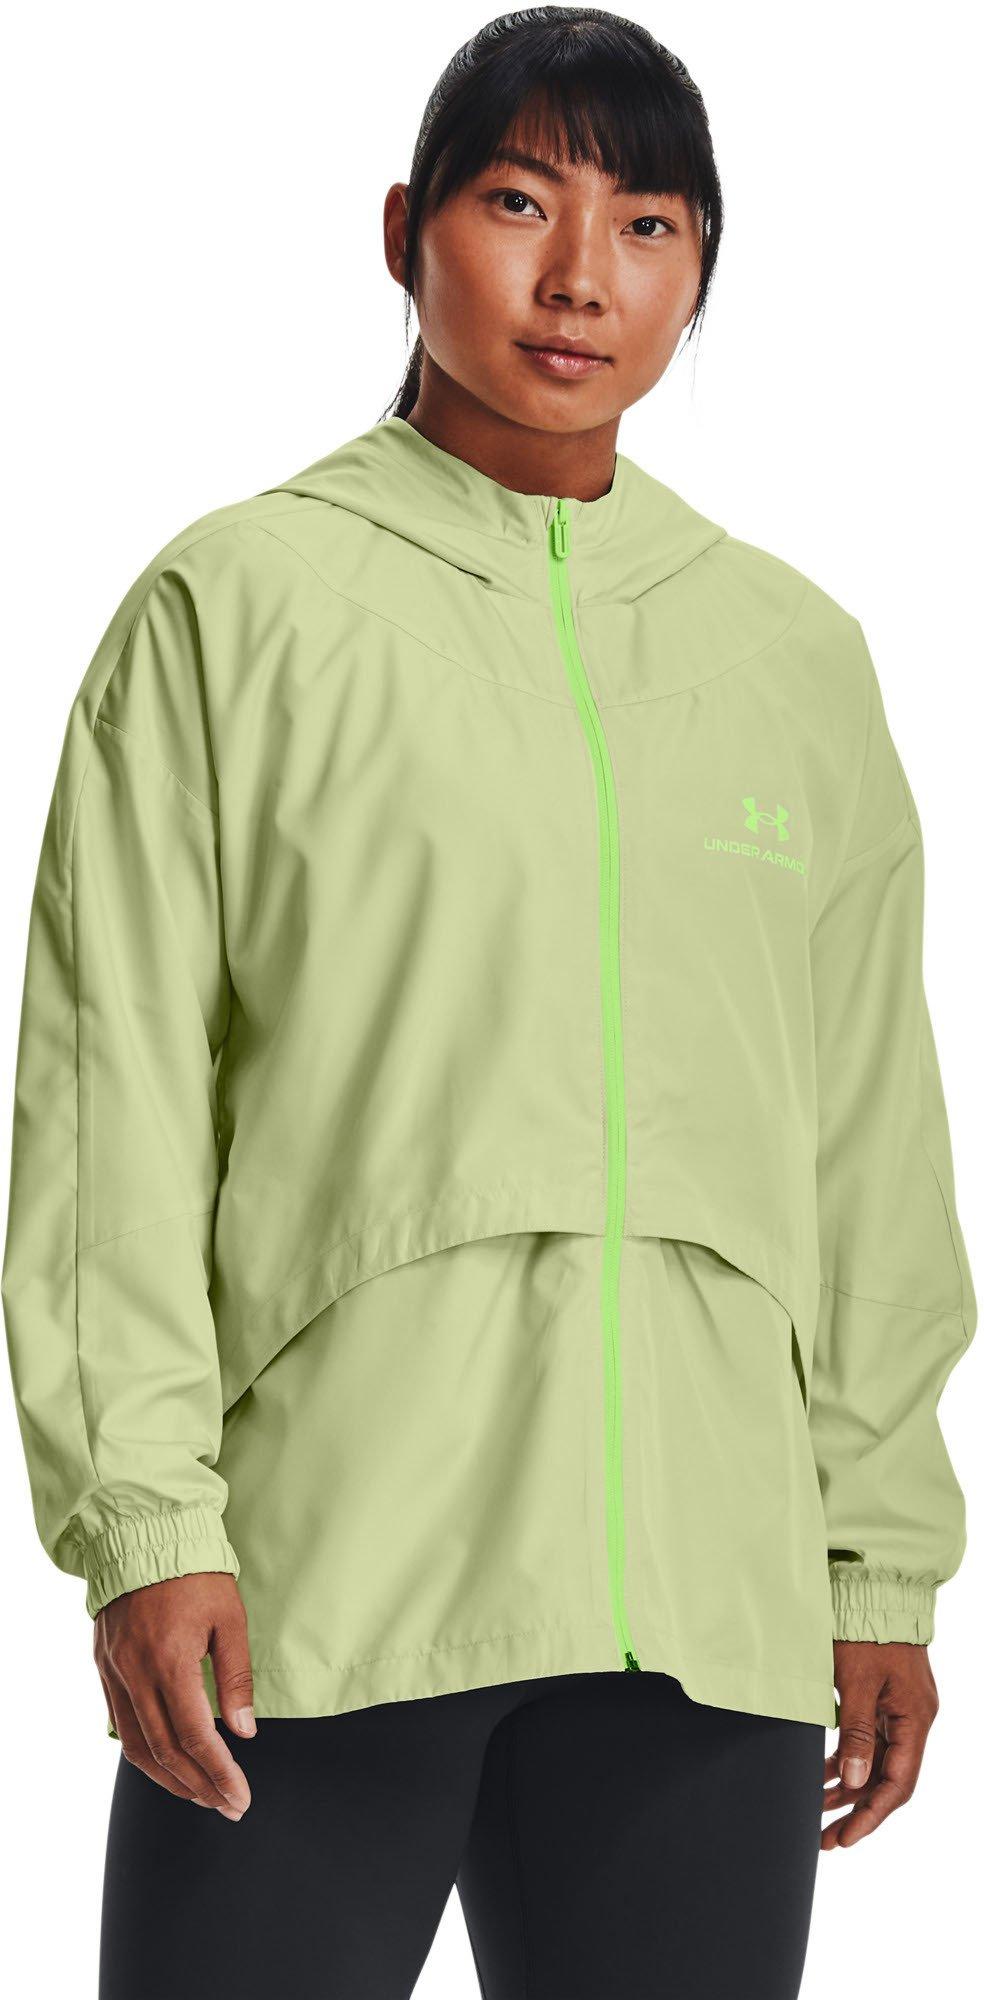 Under Armour Rush Woven Nov Jacket-GRN XS